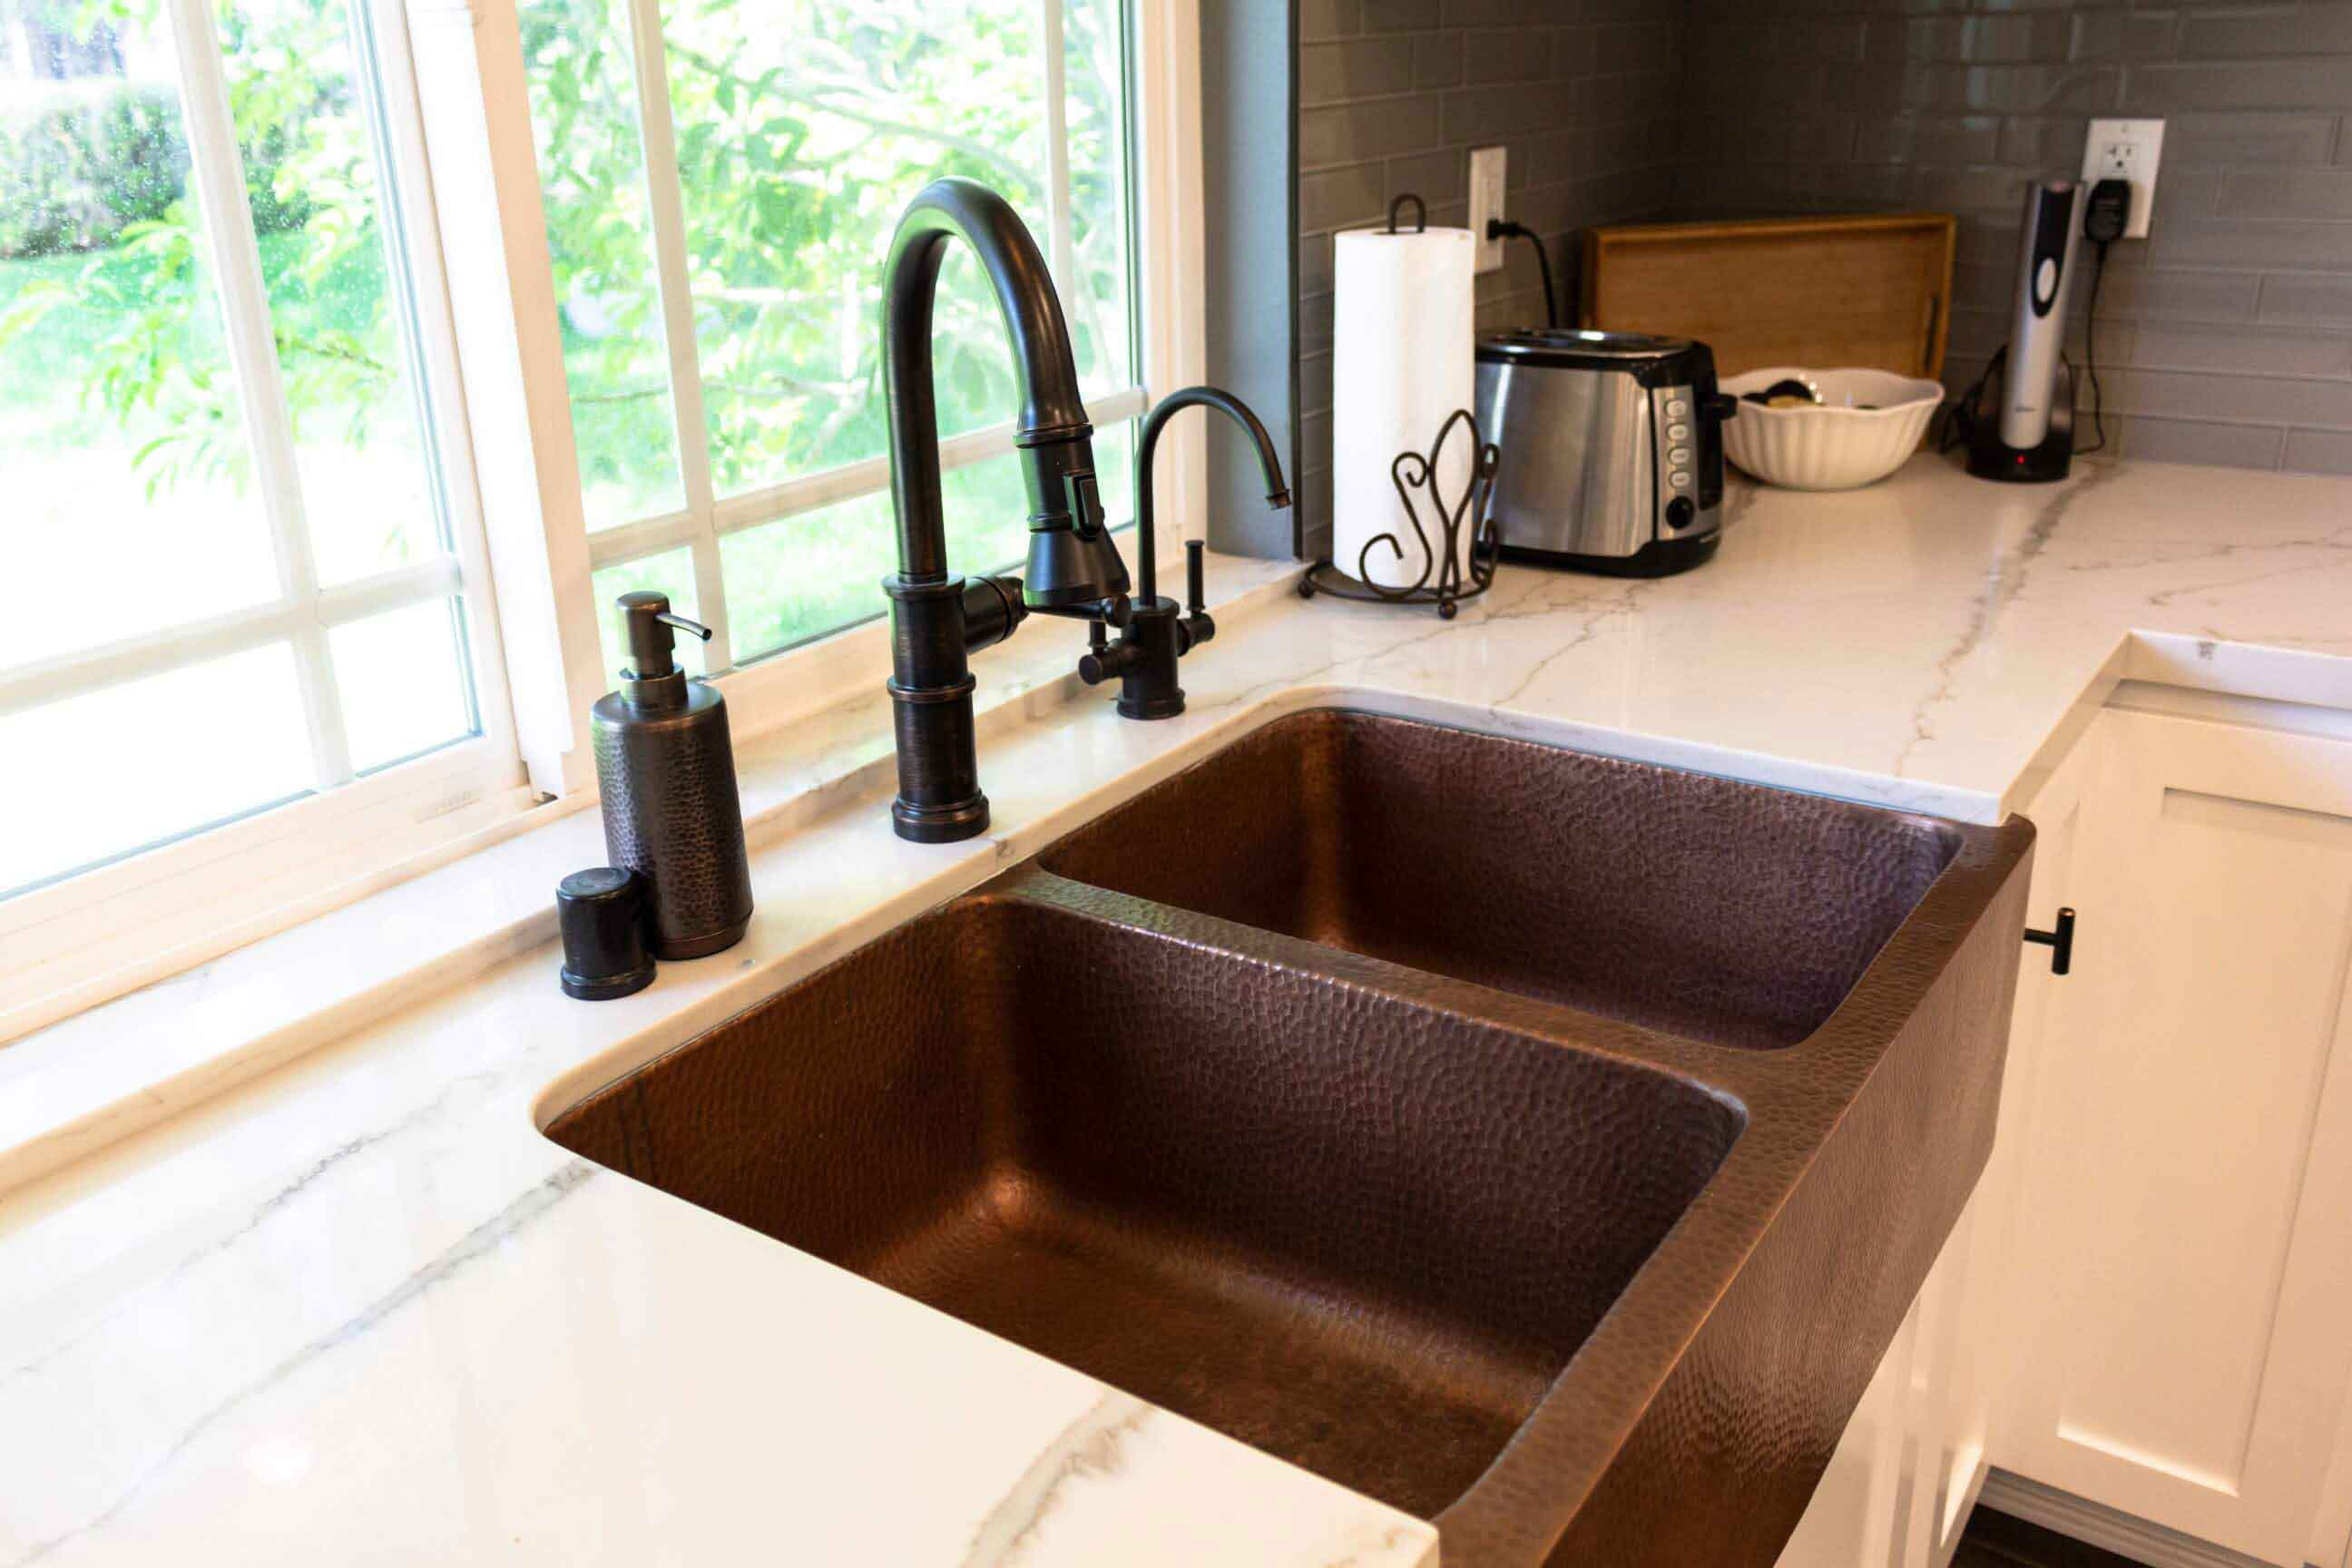 An antique style kitchen sink faucet and basin, part of a complete home remodel in Porter Ranch, California by design-build firm A-List Builders.